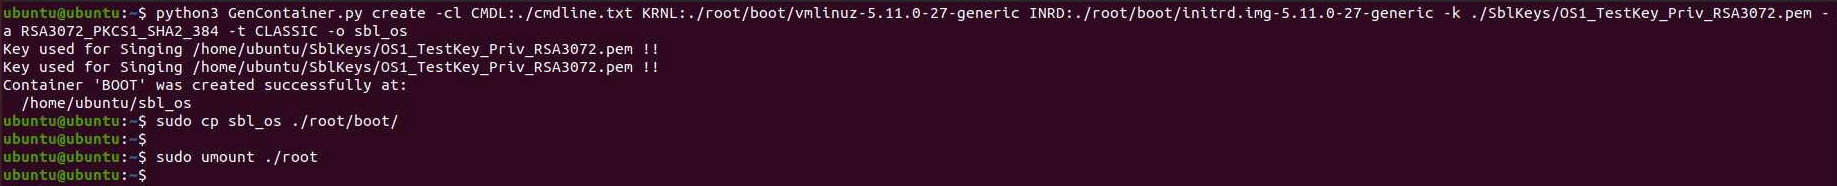 Generate container, copy to root, umount root